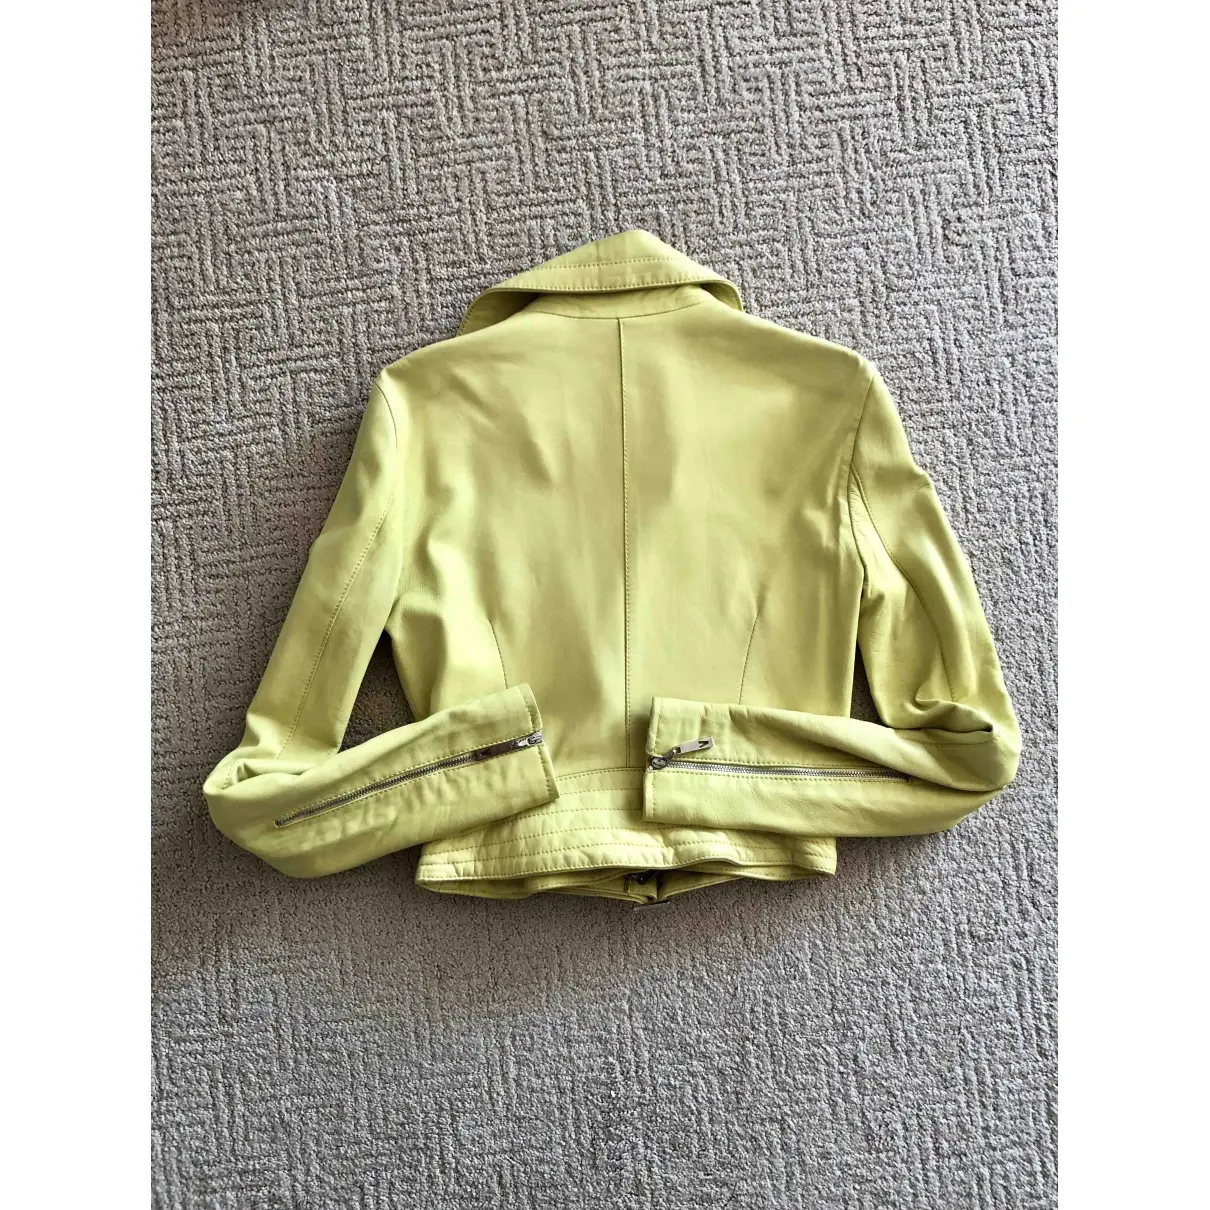 Versace Jeans Couture Leather jacket for sale - Vintage